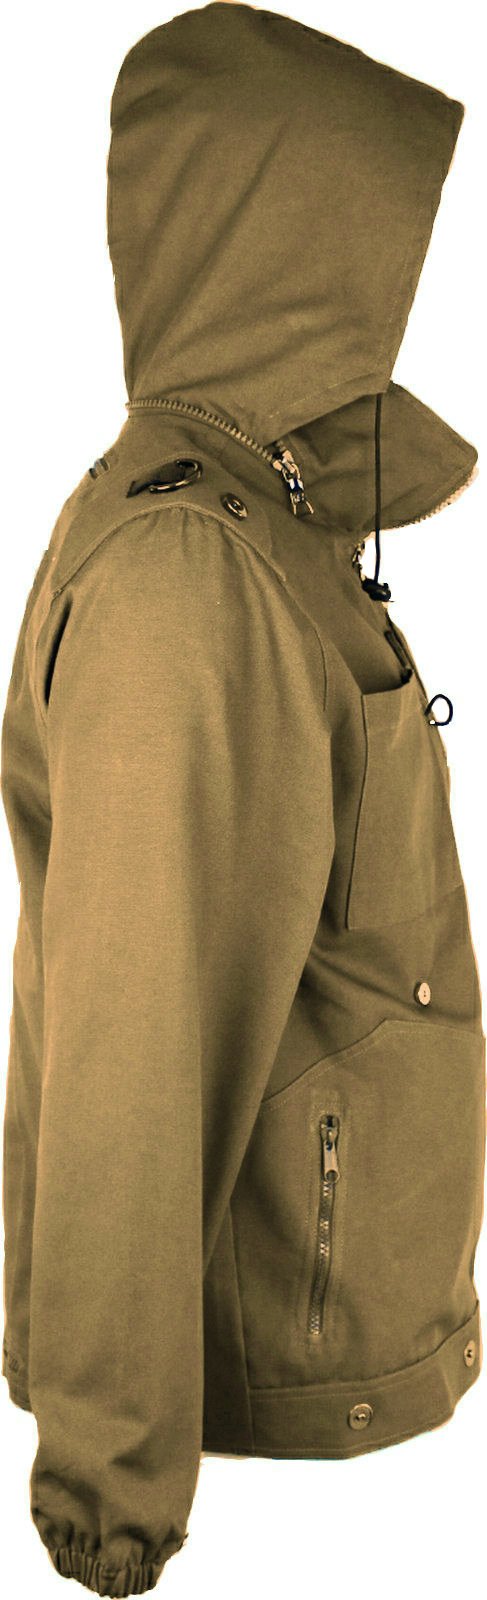 Cotton Canvas Jacket Convertible to Carry-On Backpack Travel Outdoor Camping Fishing - T&S Impact